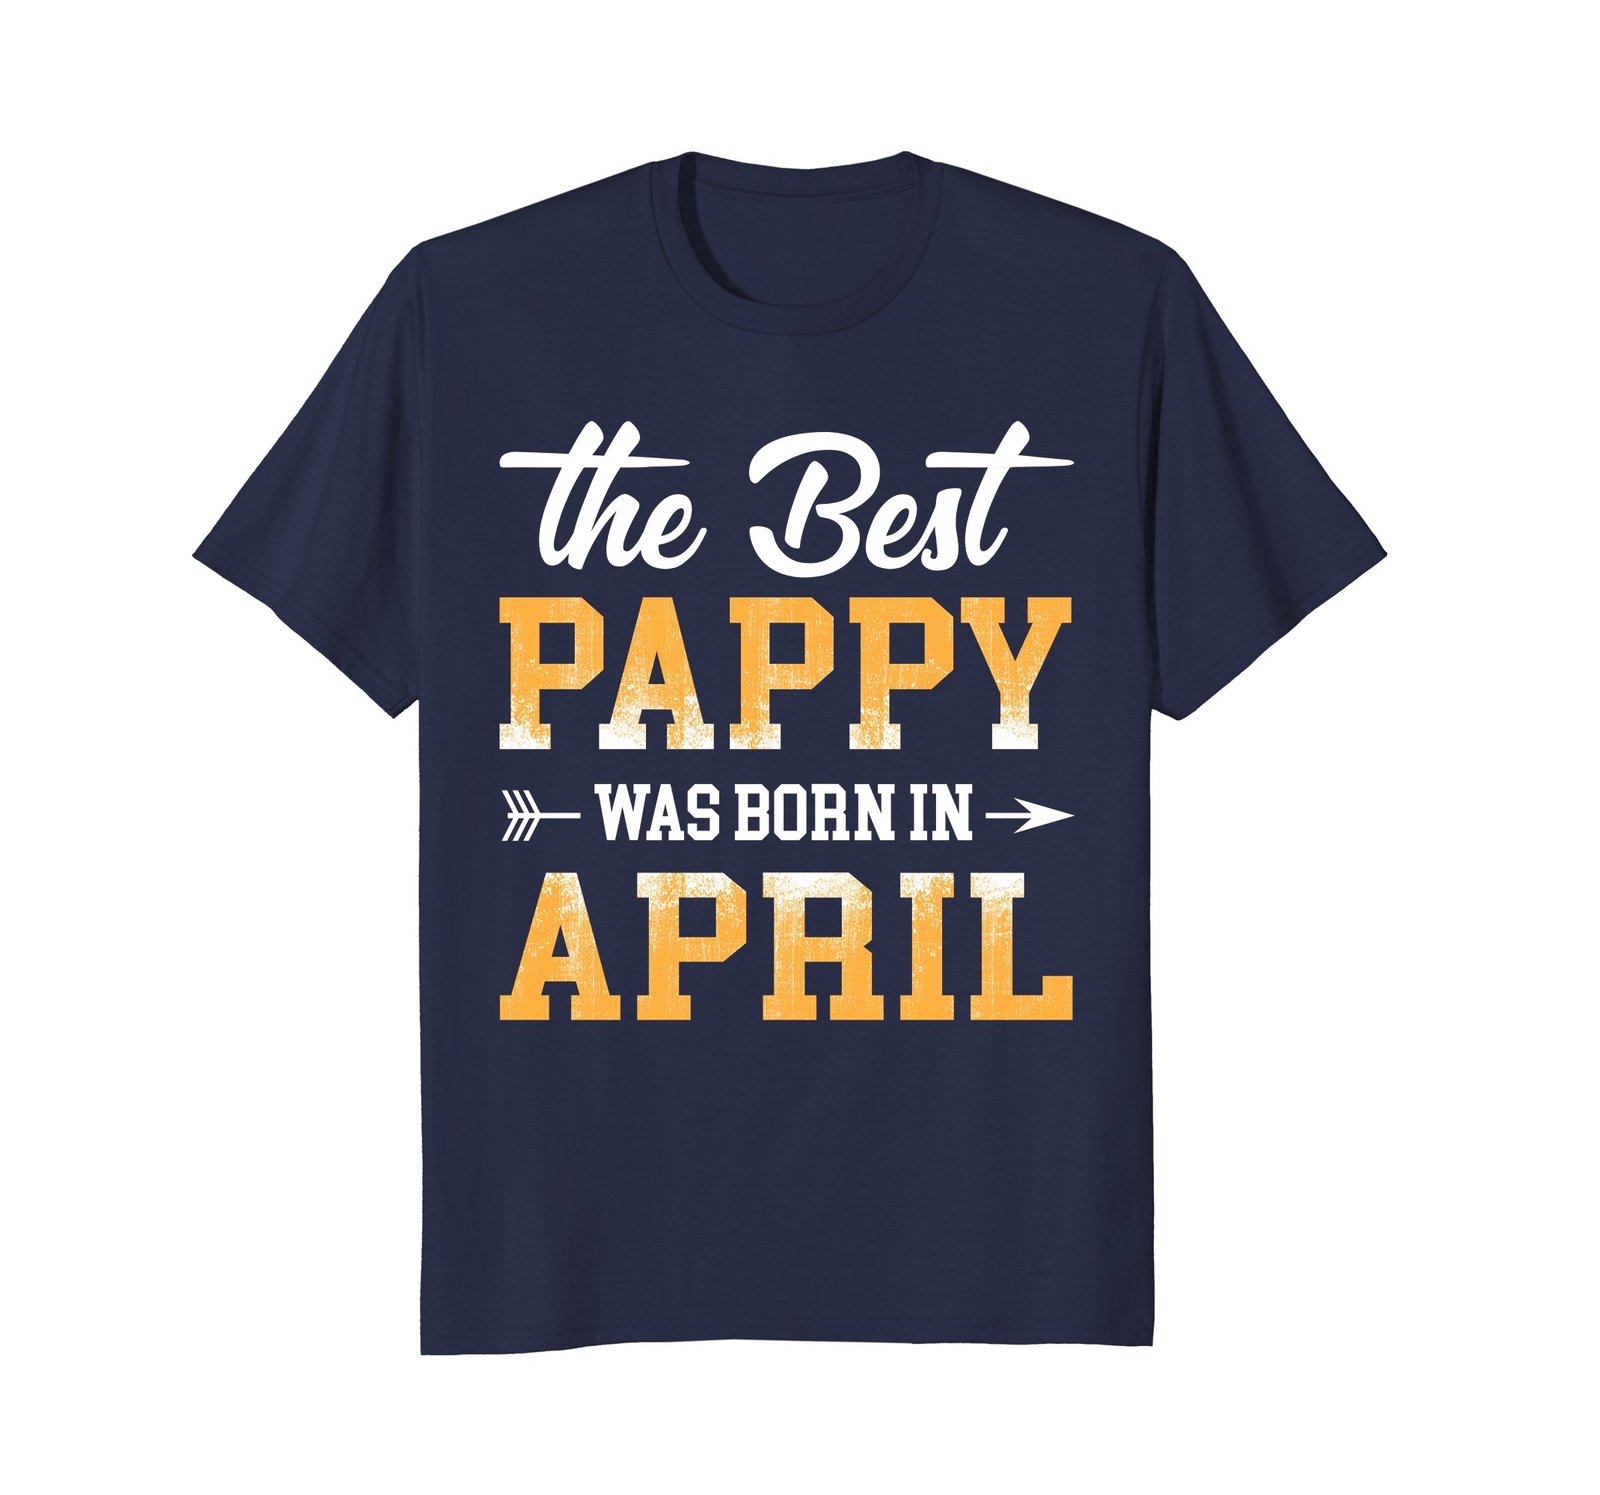 Funny Shirts - The Best Pappy Was Born In April T-Shirt Men